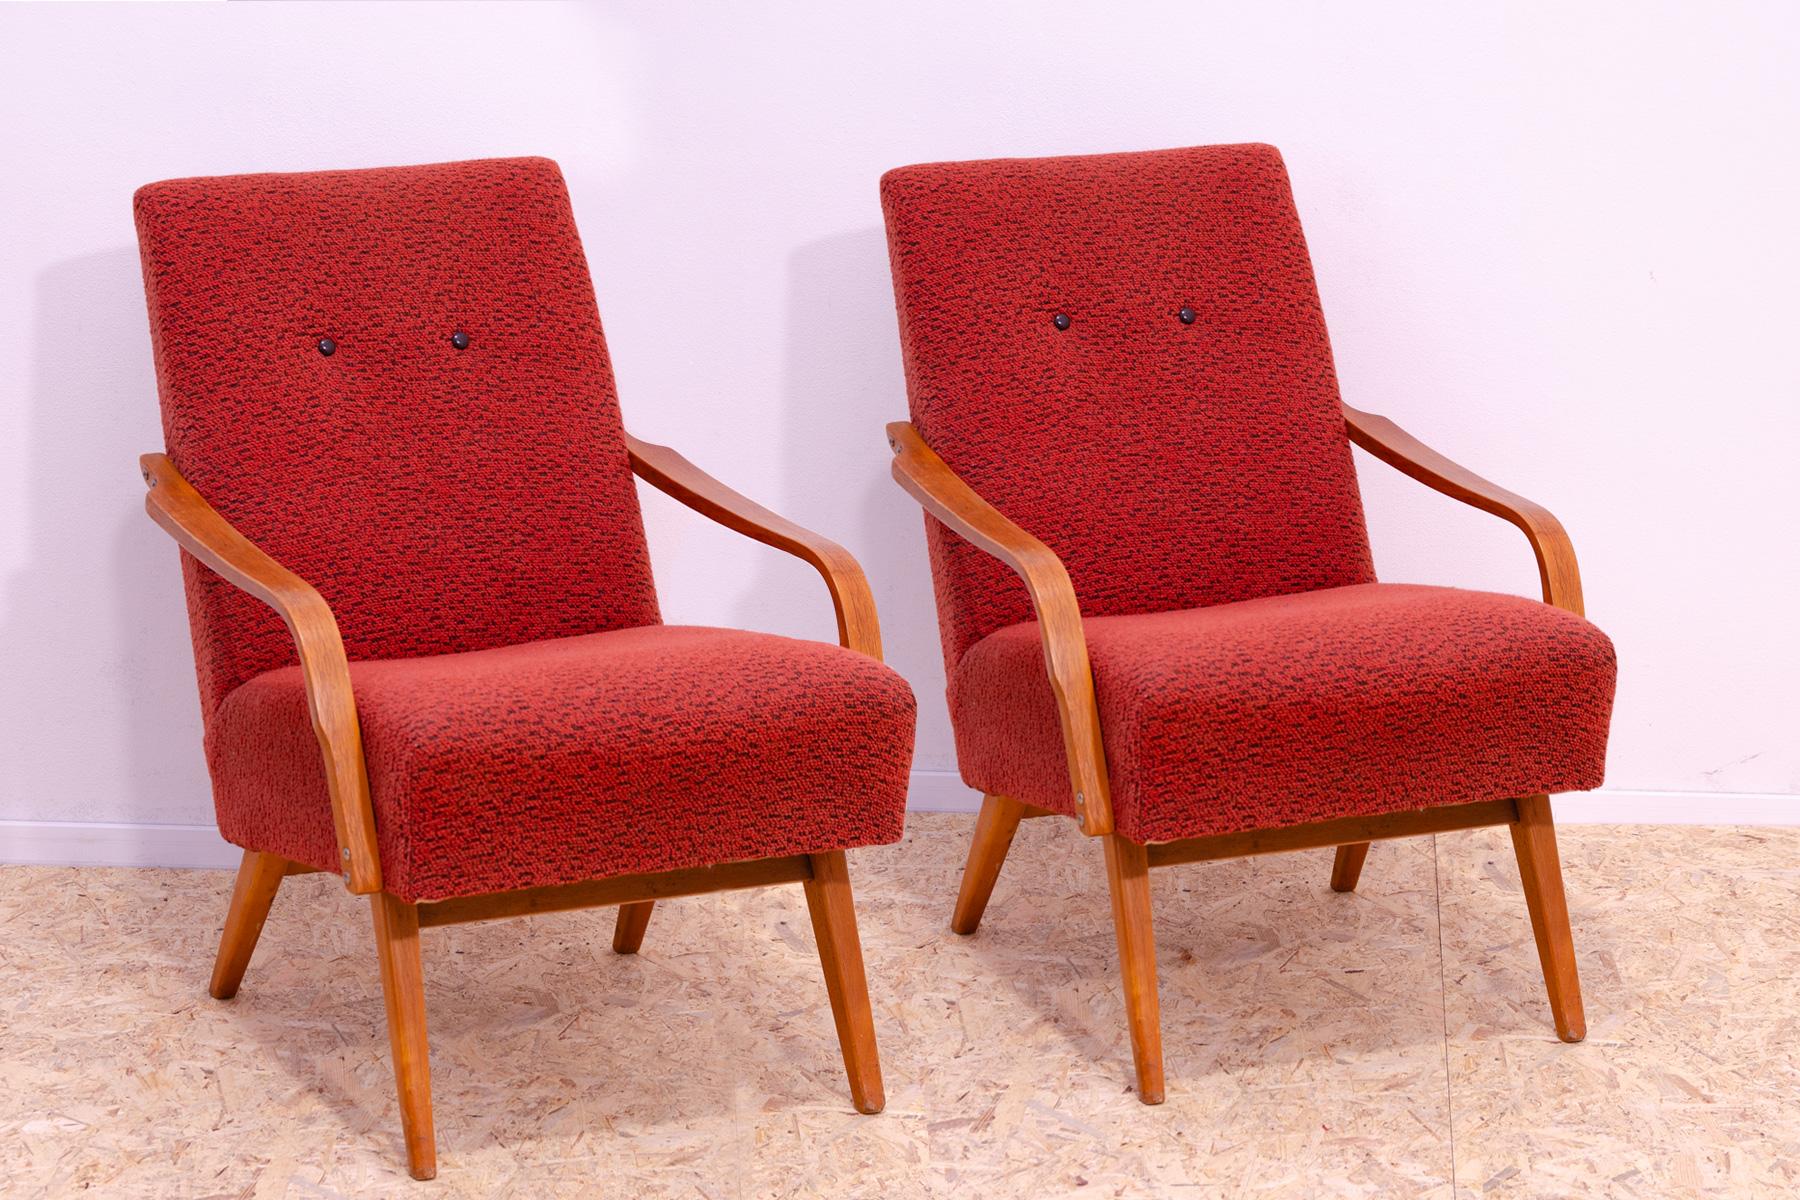 These bentwood armchairs were designed by Jaroslav Šmídek and made by Český nábytek company in the former Czechoslovakia in the 1960´s.

The chairs are stable and comfortable. These are in good Vintage condition, shows slight signs of age and